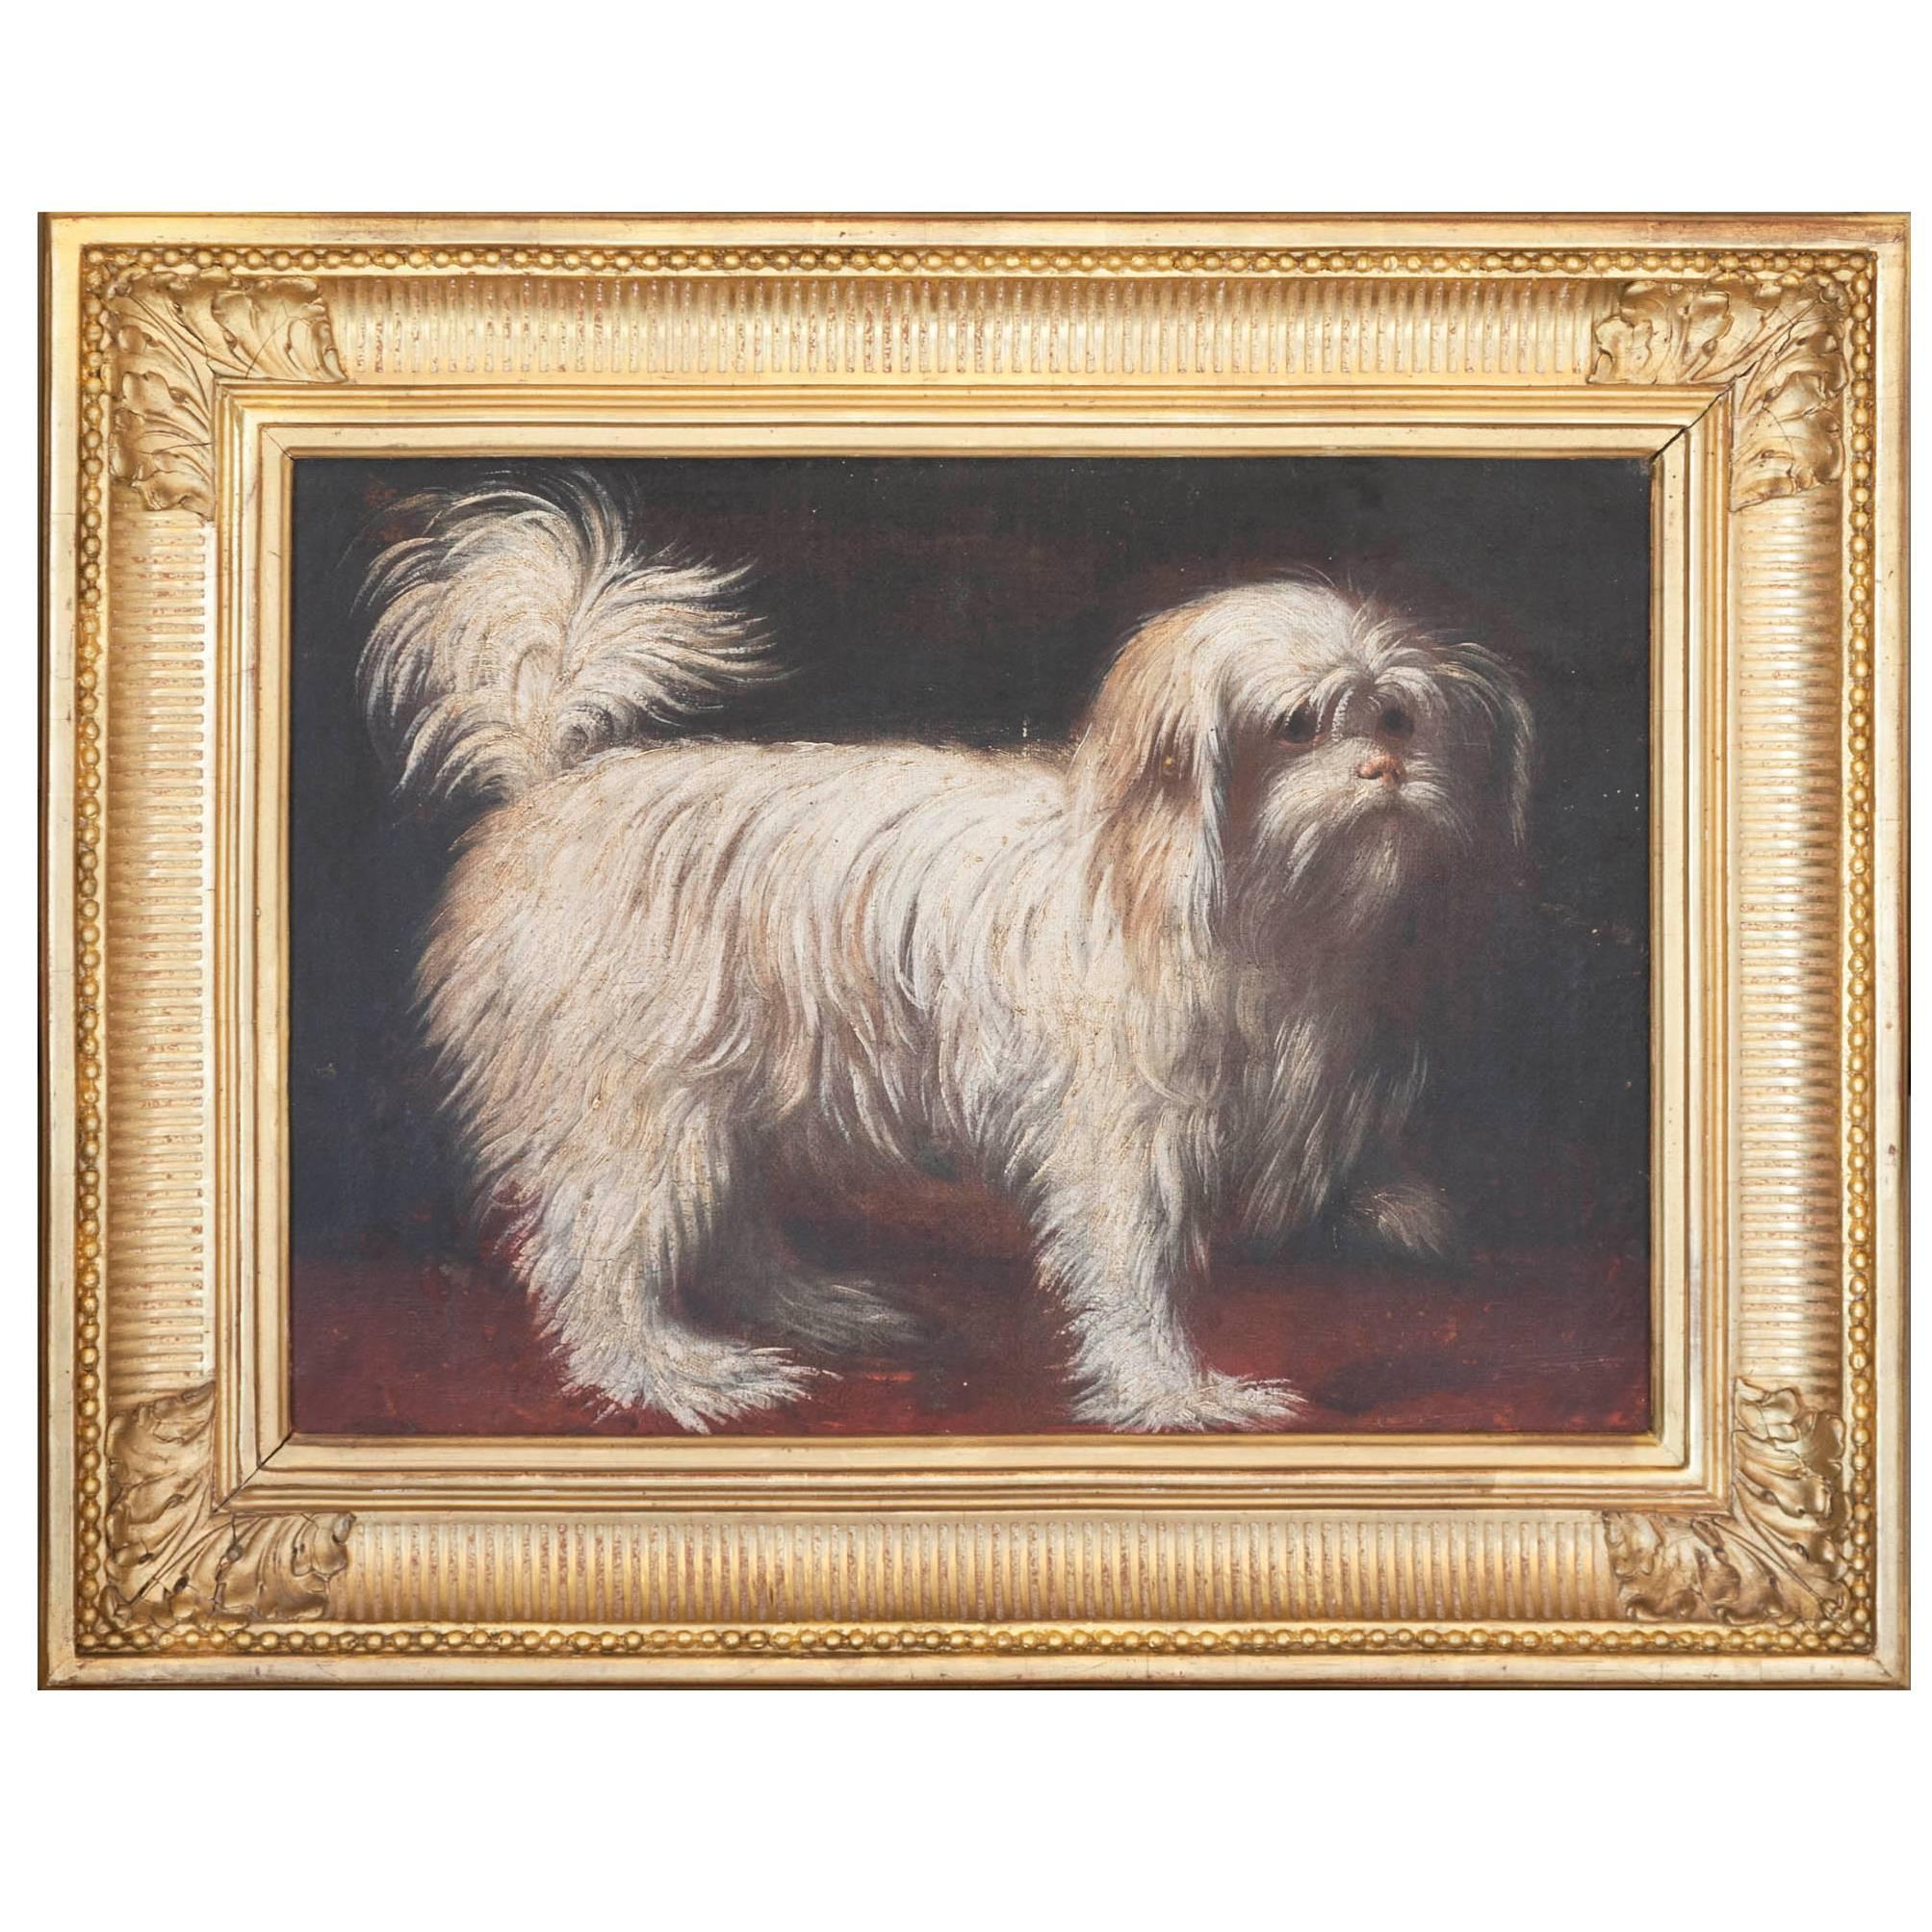 Charming 19th Century Oil on Canvas Painting of a Small White Dog in Gilt Frame